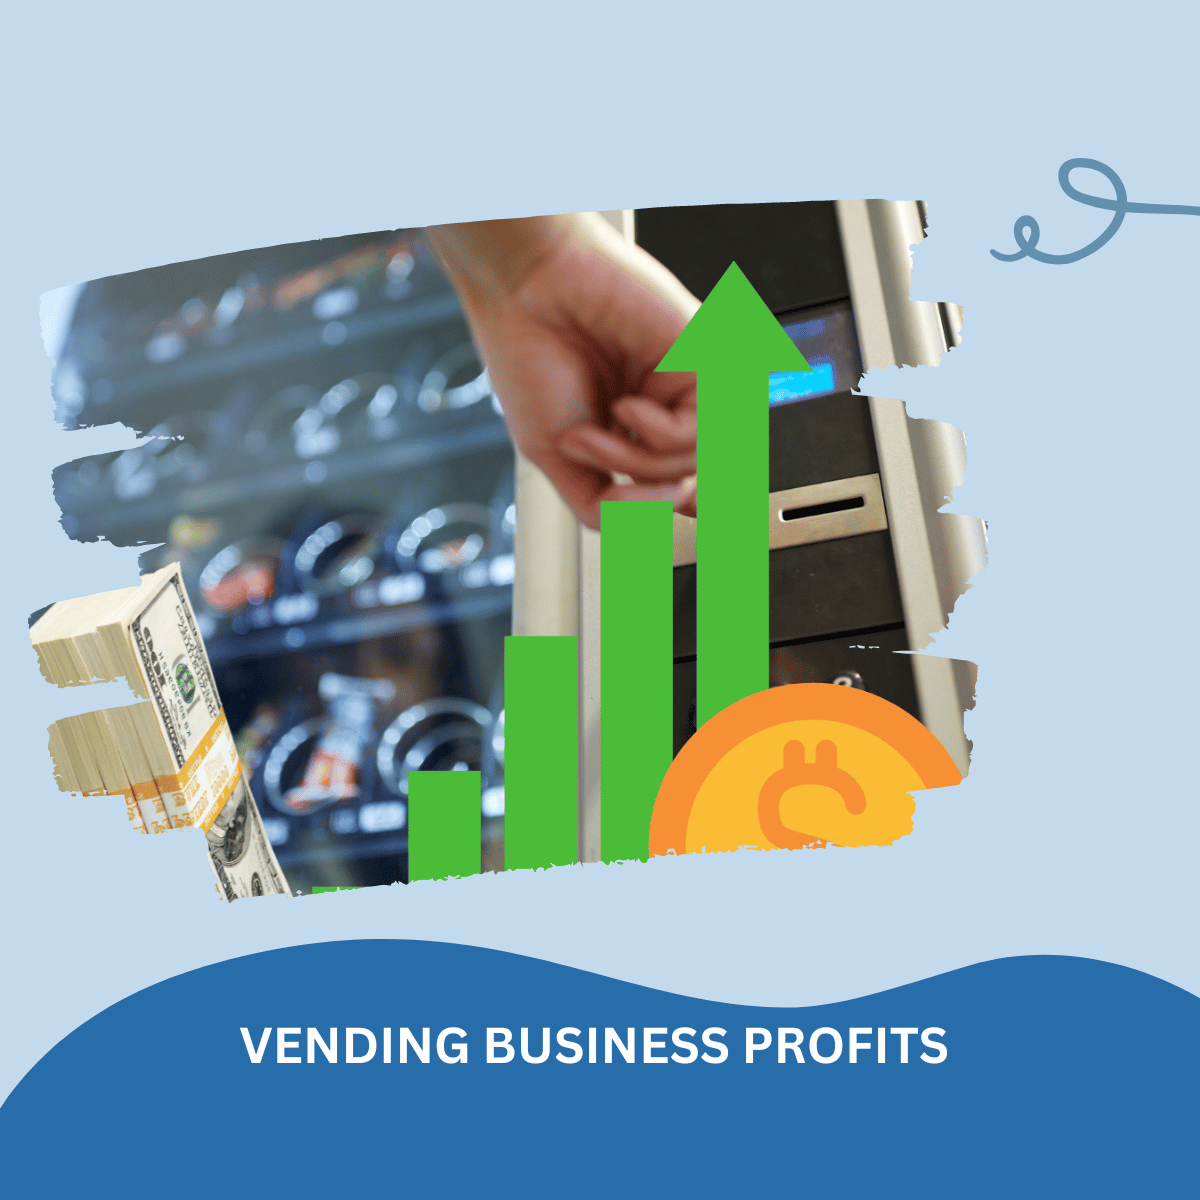 RELIABLE AND AFFORDABLE USED VENDING MACHINES FOR SALE INCREASE PROFITS